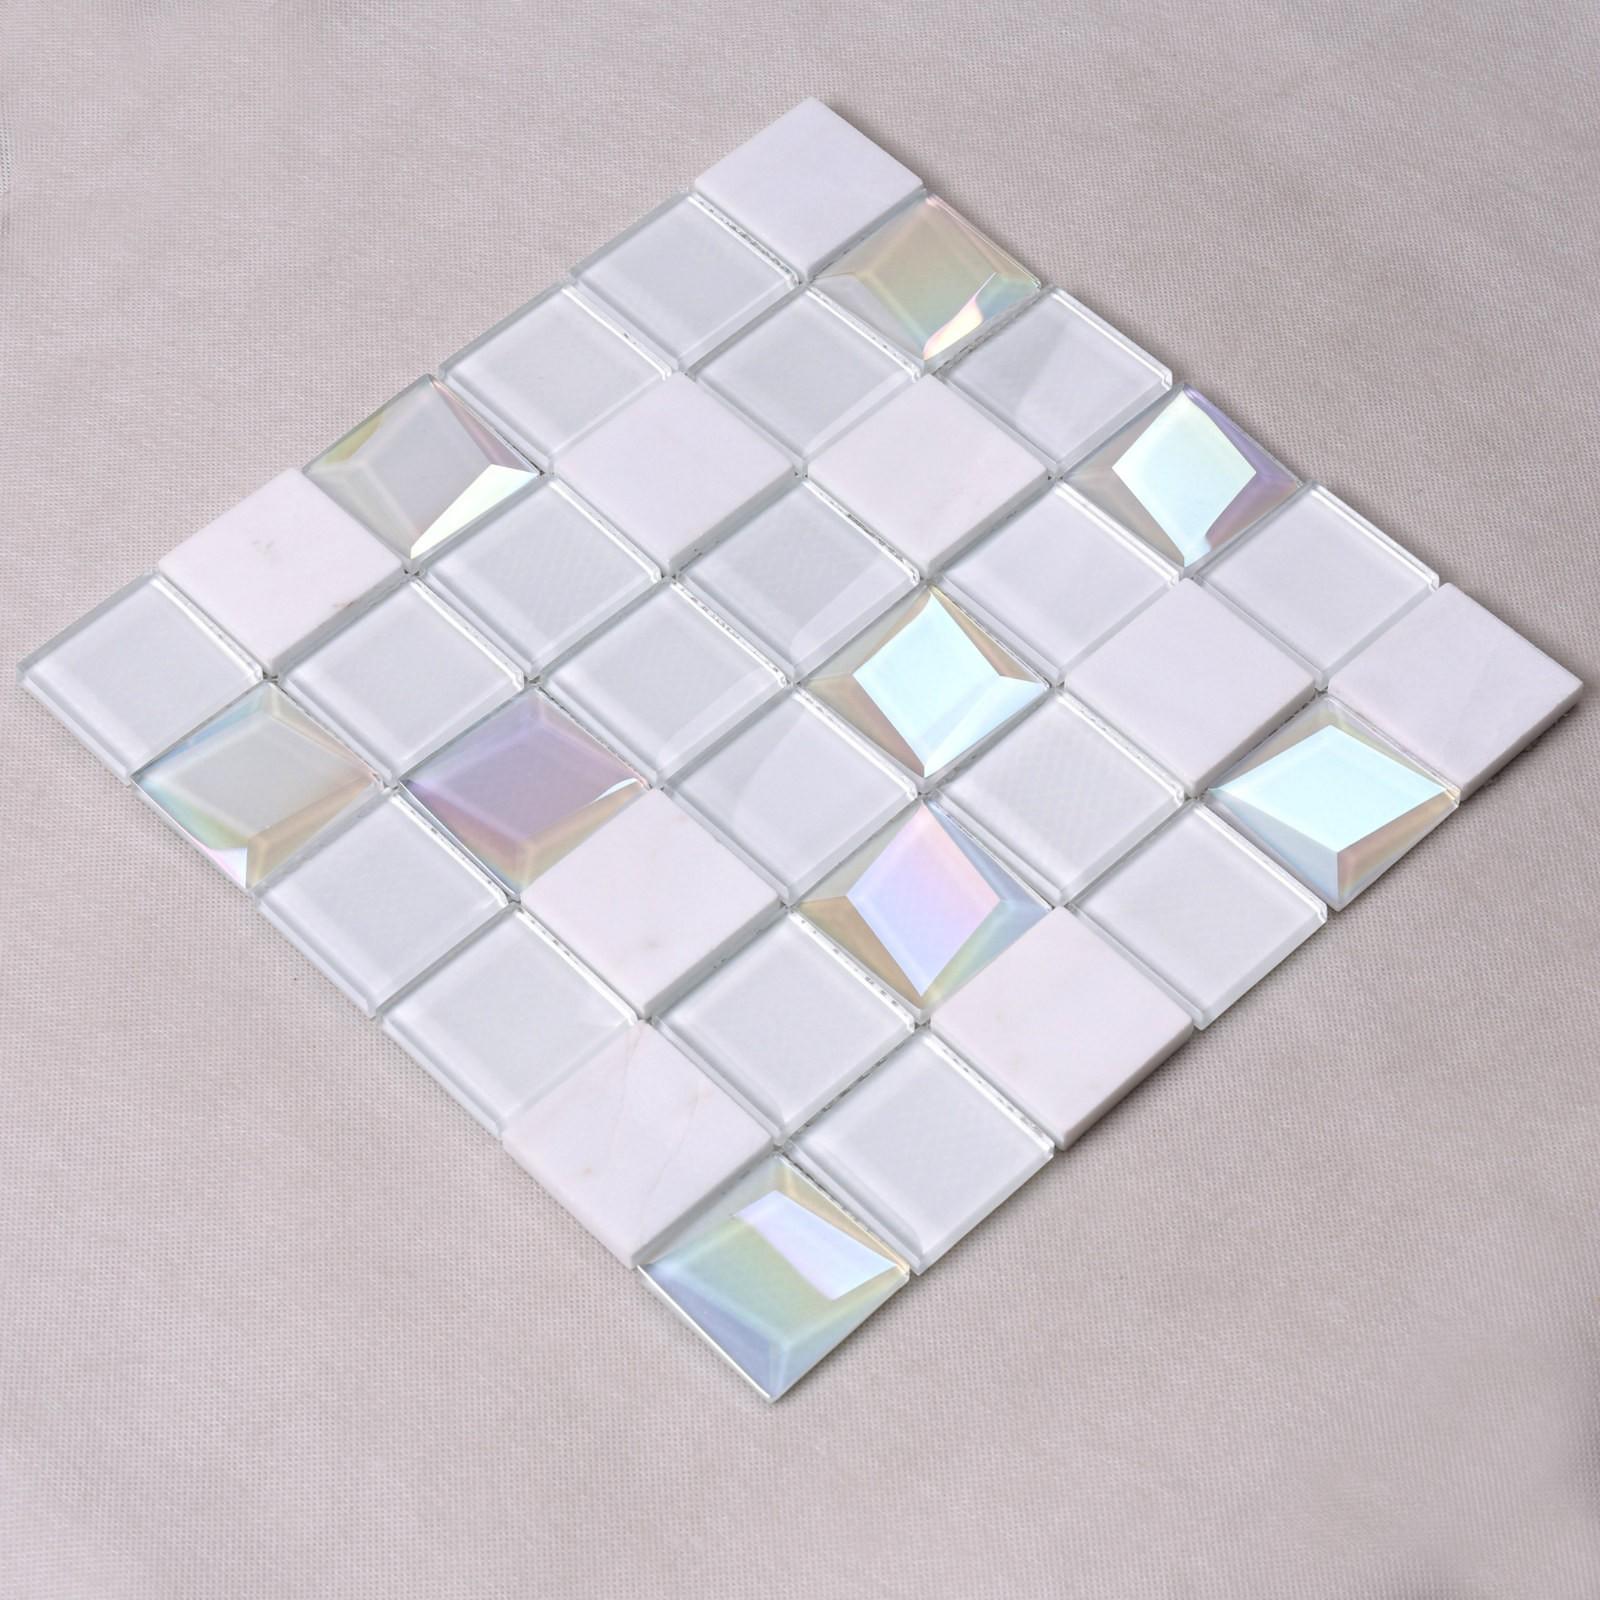 Heng Xing wall 12x12 glass tile Supply for kitchen-2